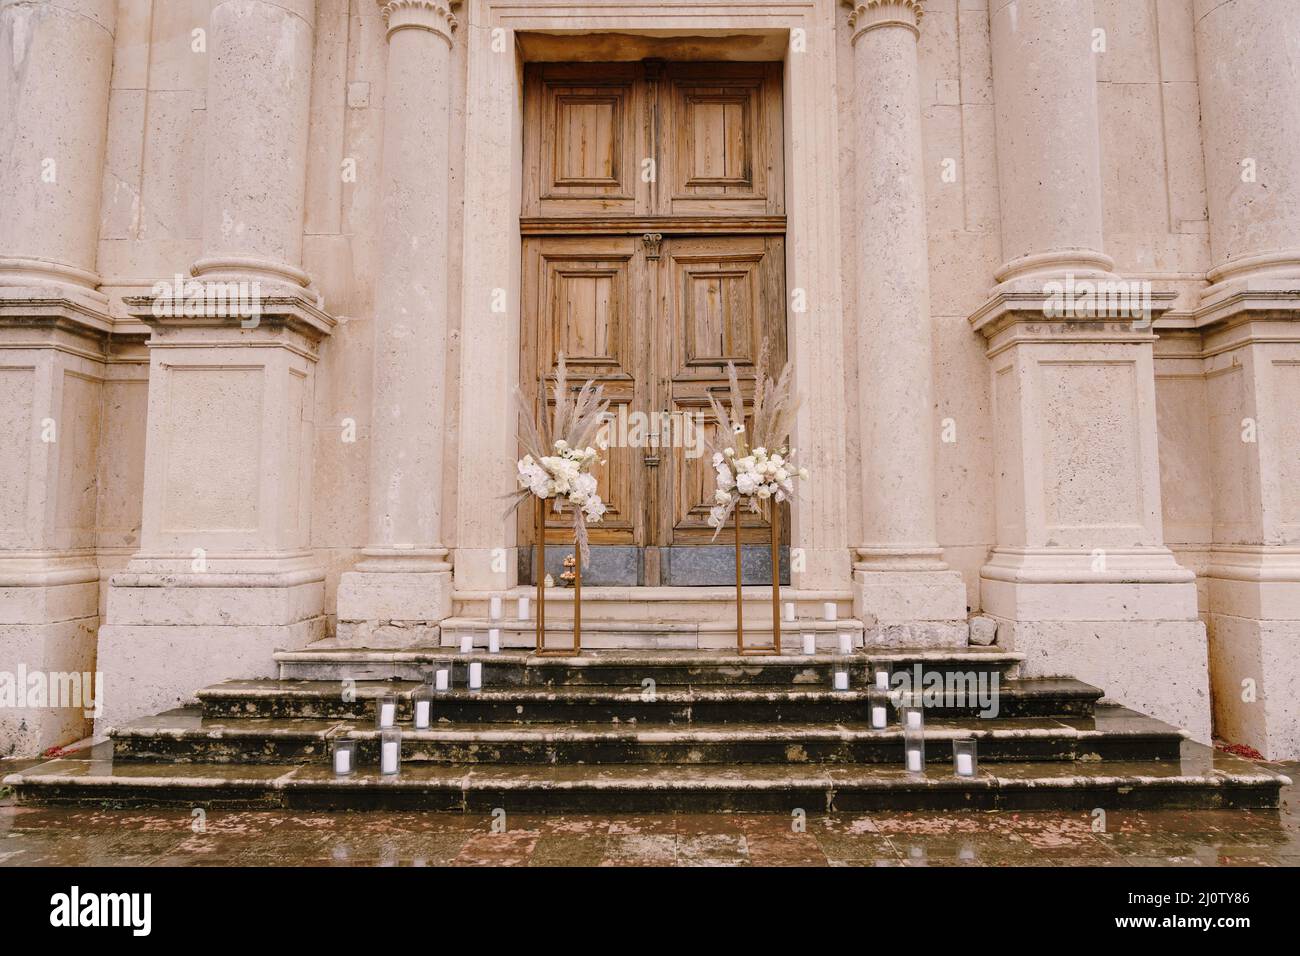 Bouquets of flowers stand on golden plinths on the wet steps in front of a wooden door of the church Stock Photo